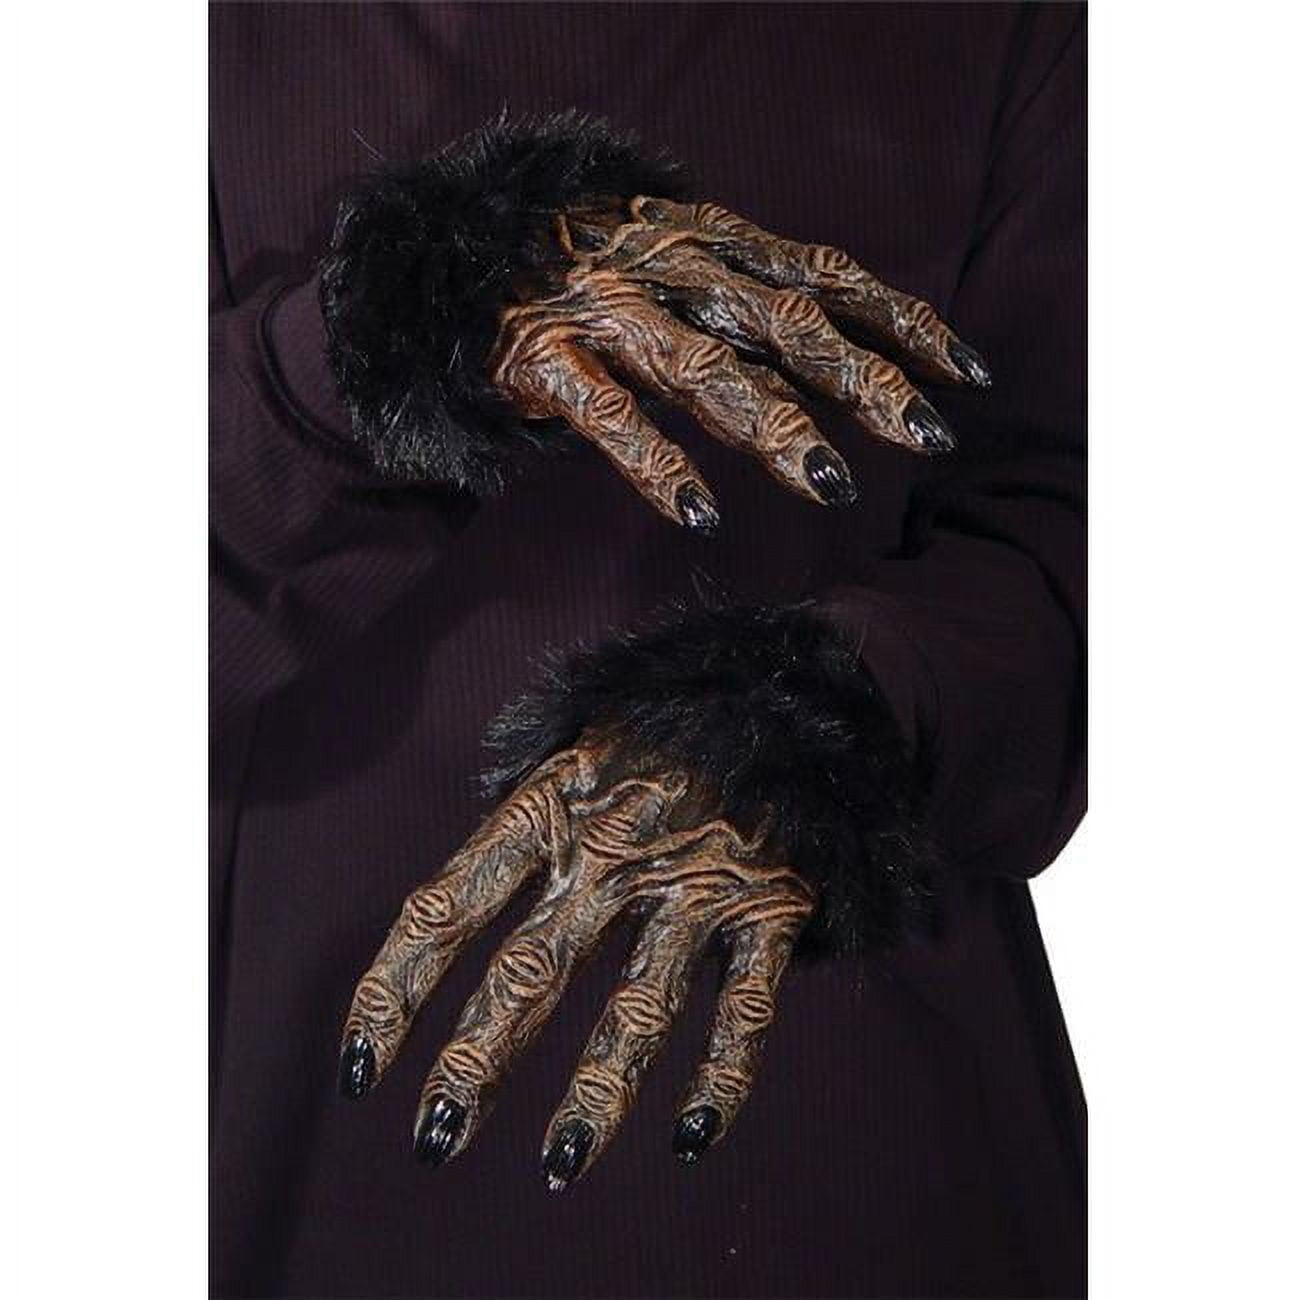 Freddy Krueger Glove with nails knives, Nightmare on Elm Street - Halloween  costume, party - . Gift Ideas